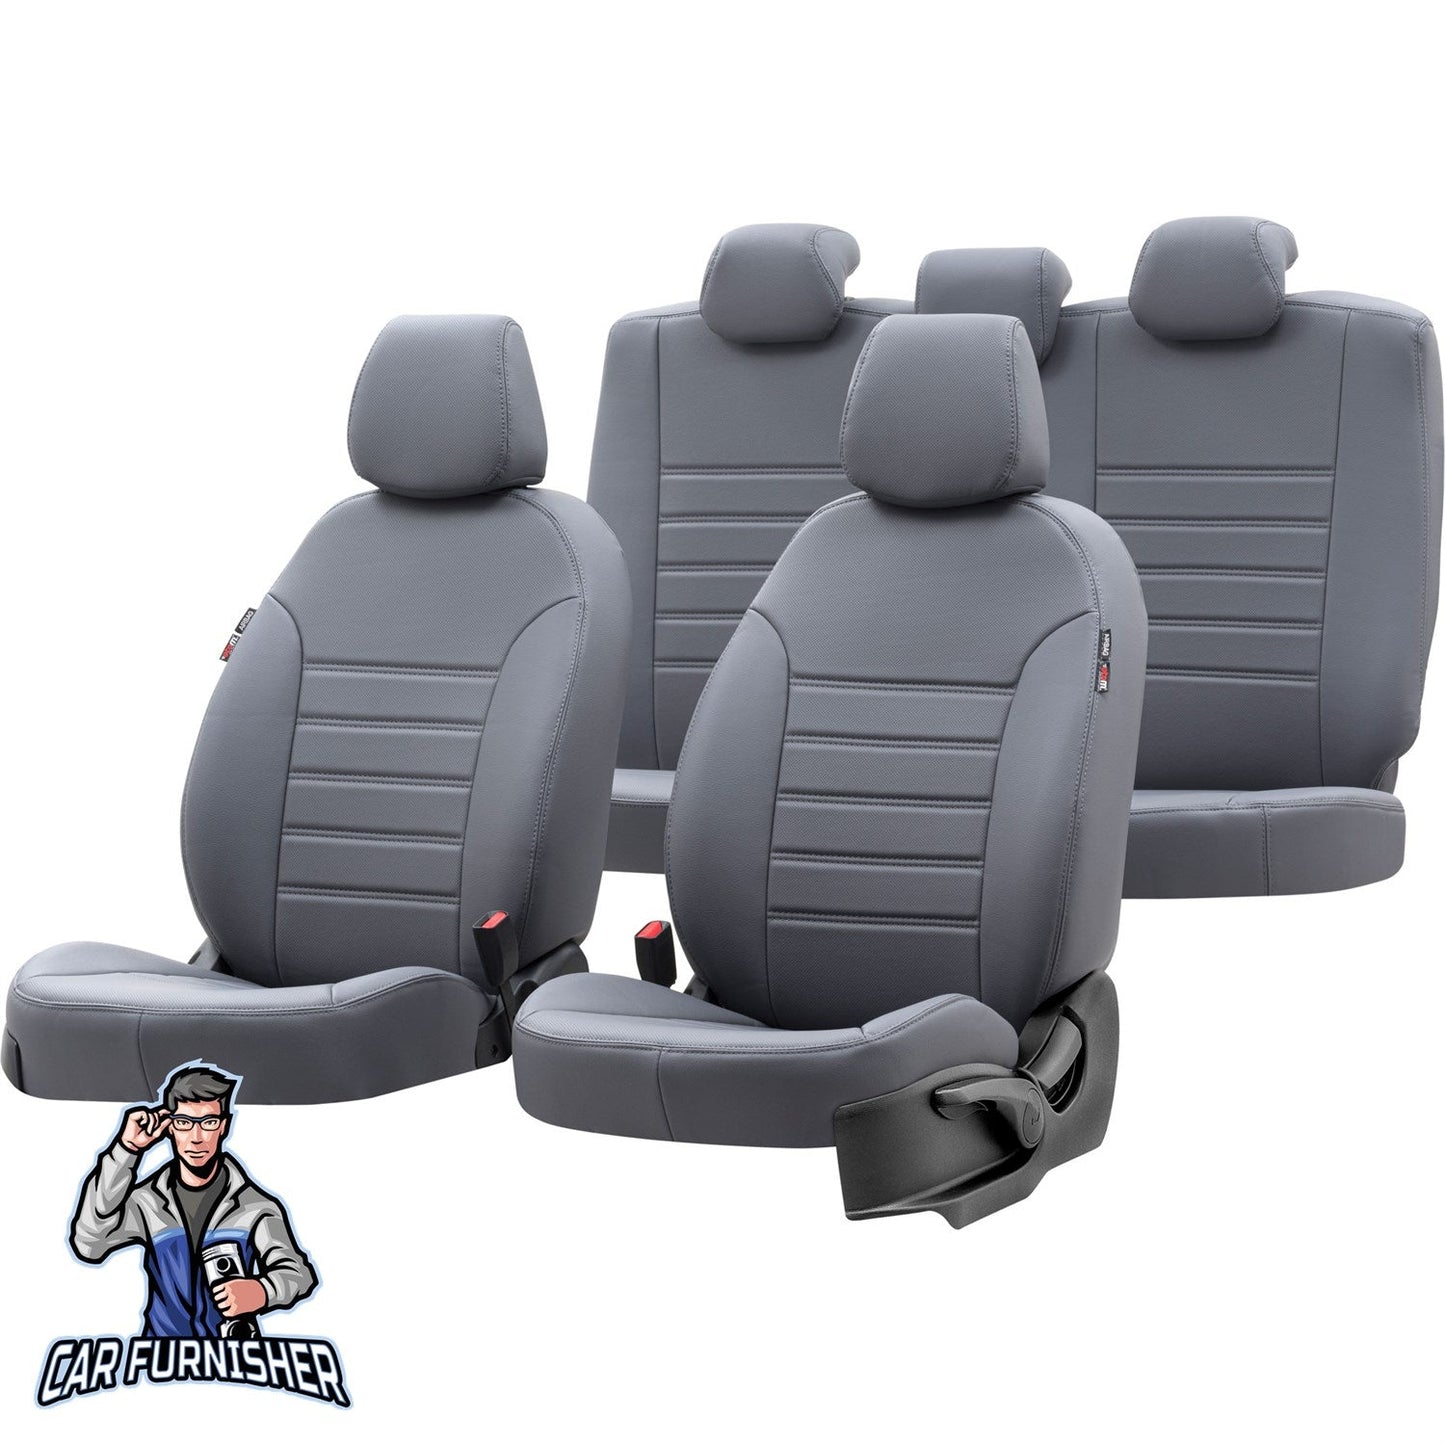 Nissan Navara Seat Covers Istanbul Leather Design Smoked Leather